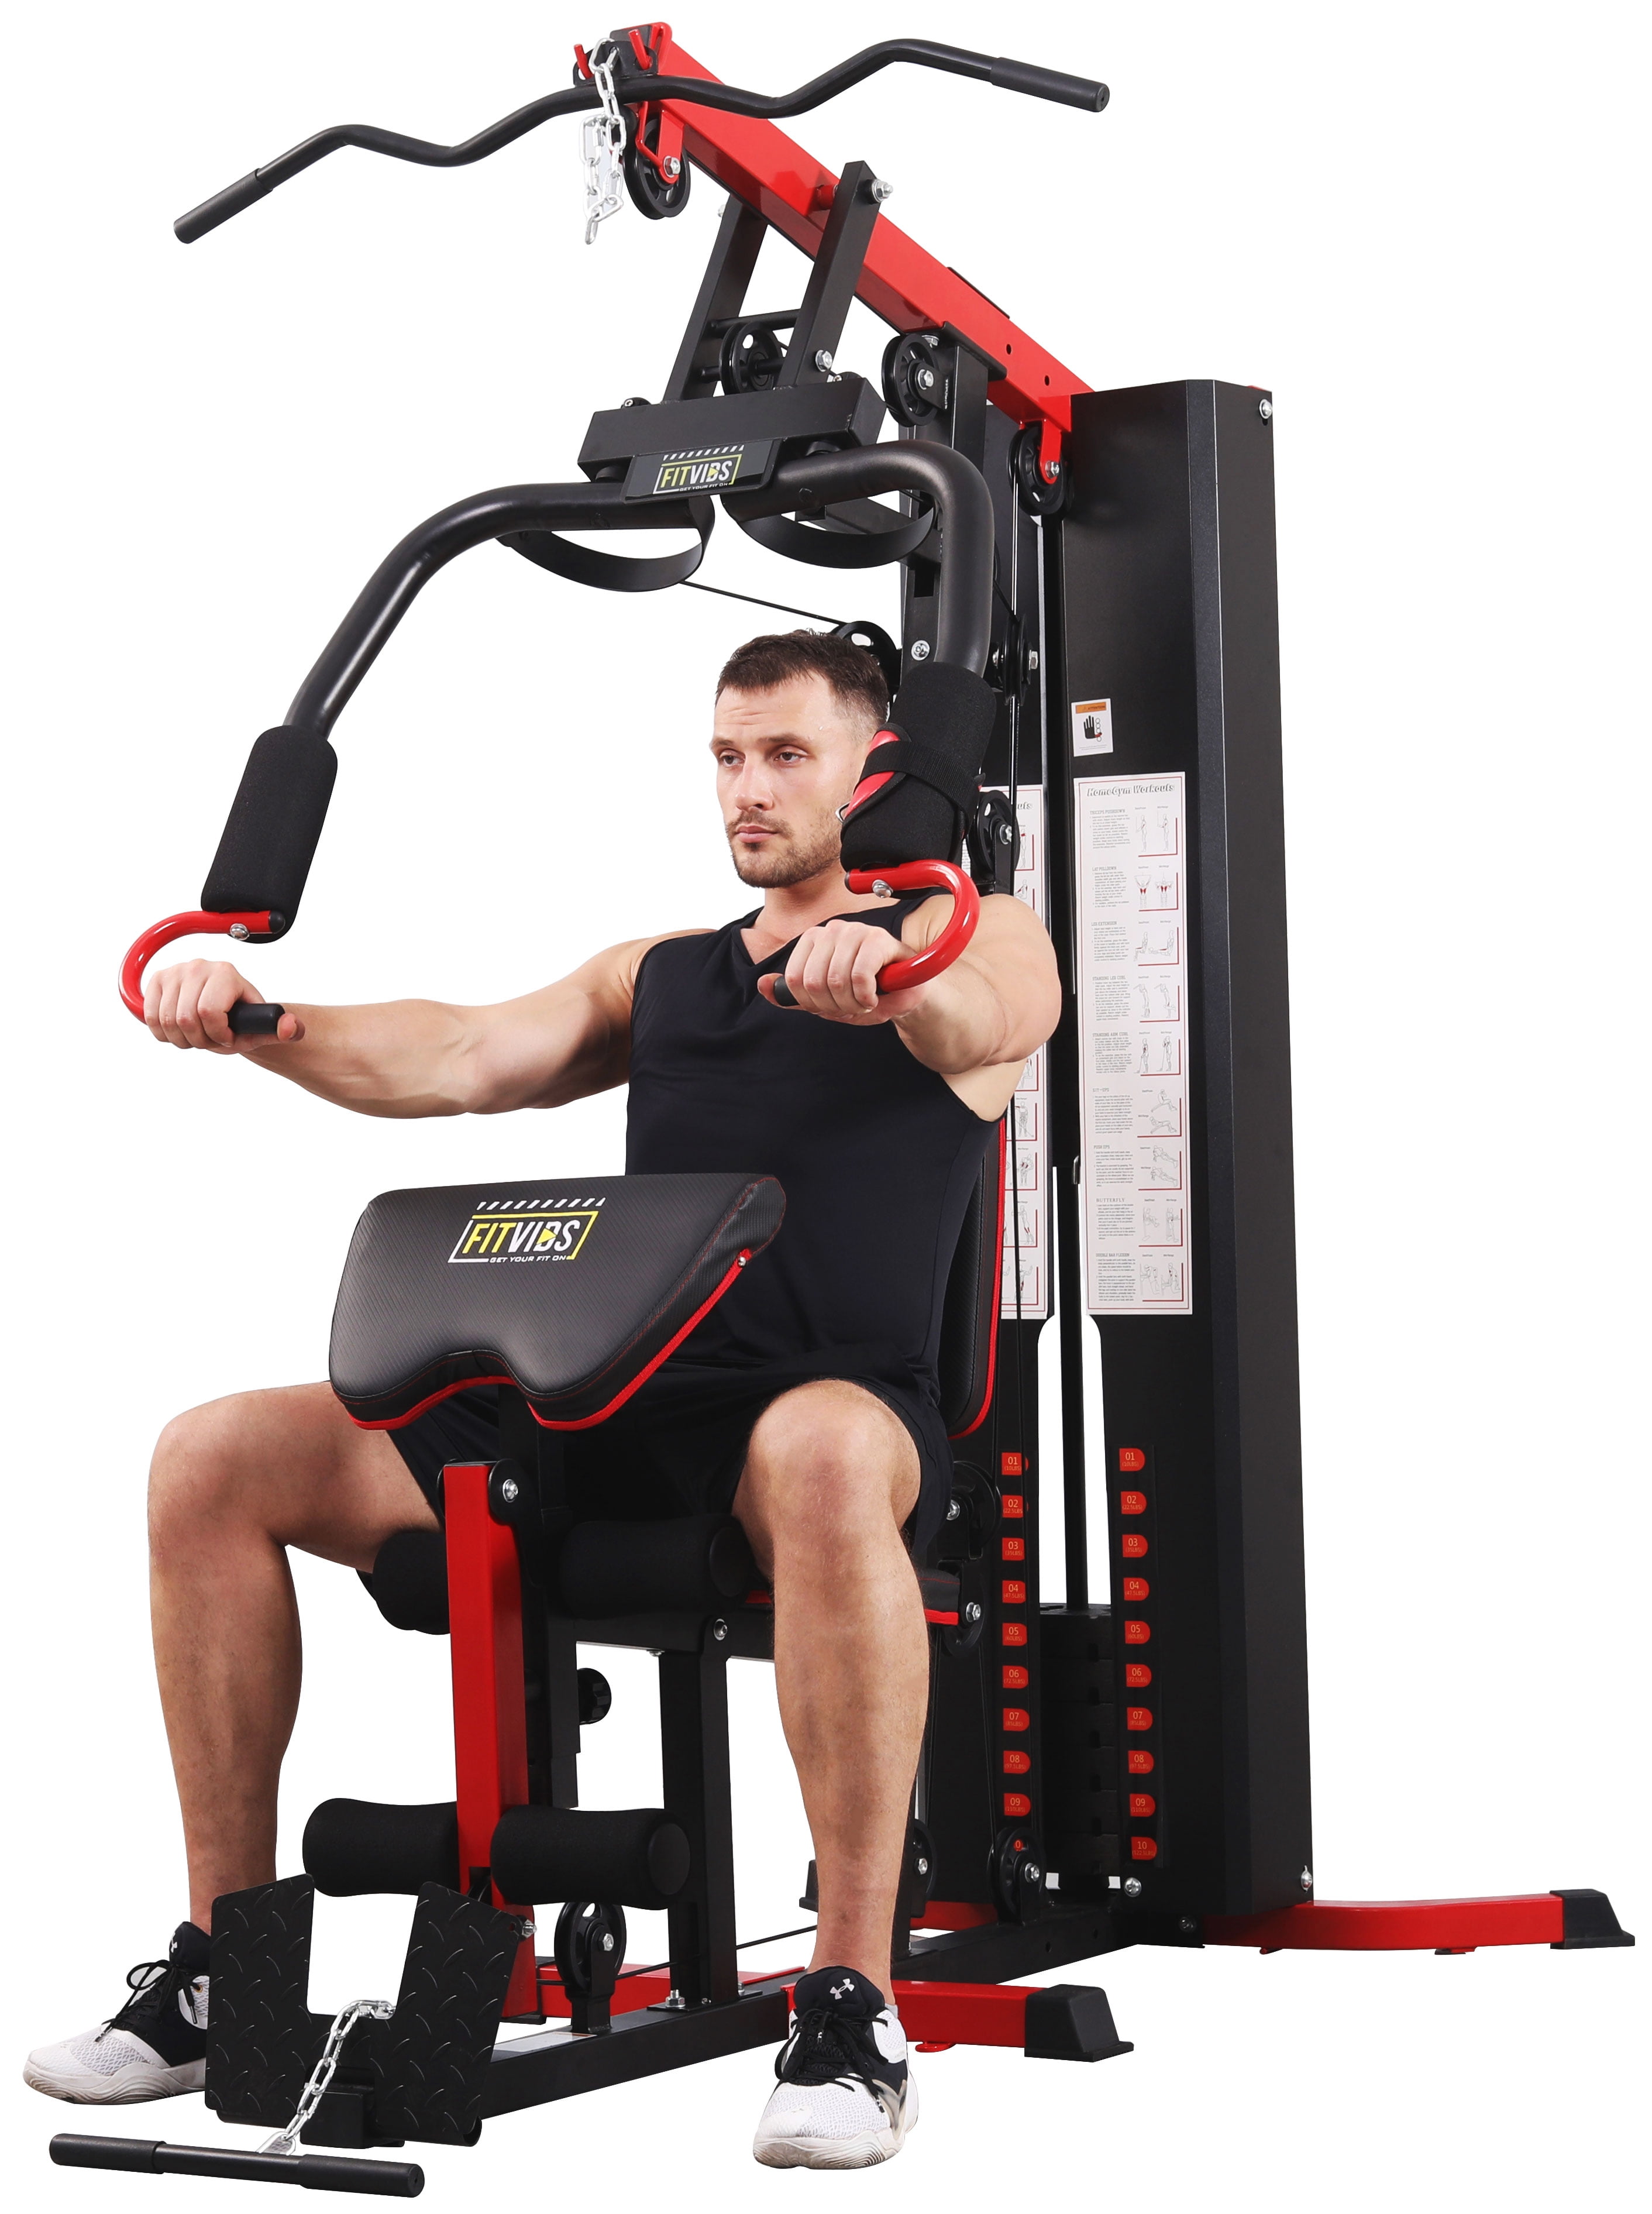 Fitvids LX750 Home Gym System Workout Station with 330 Lbs of Resistance,  122.5 Lbs Weight Stack, One Station, Comes with Installation Instruction